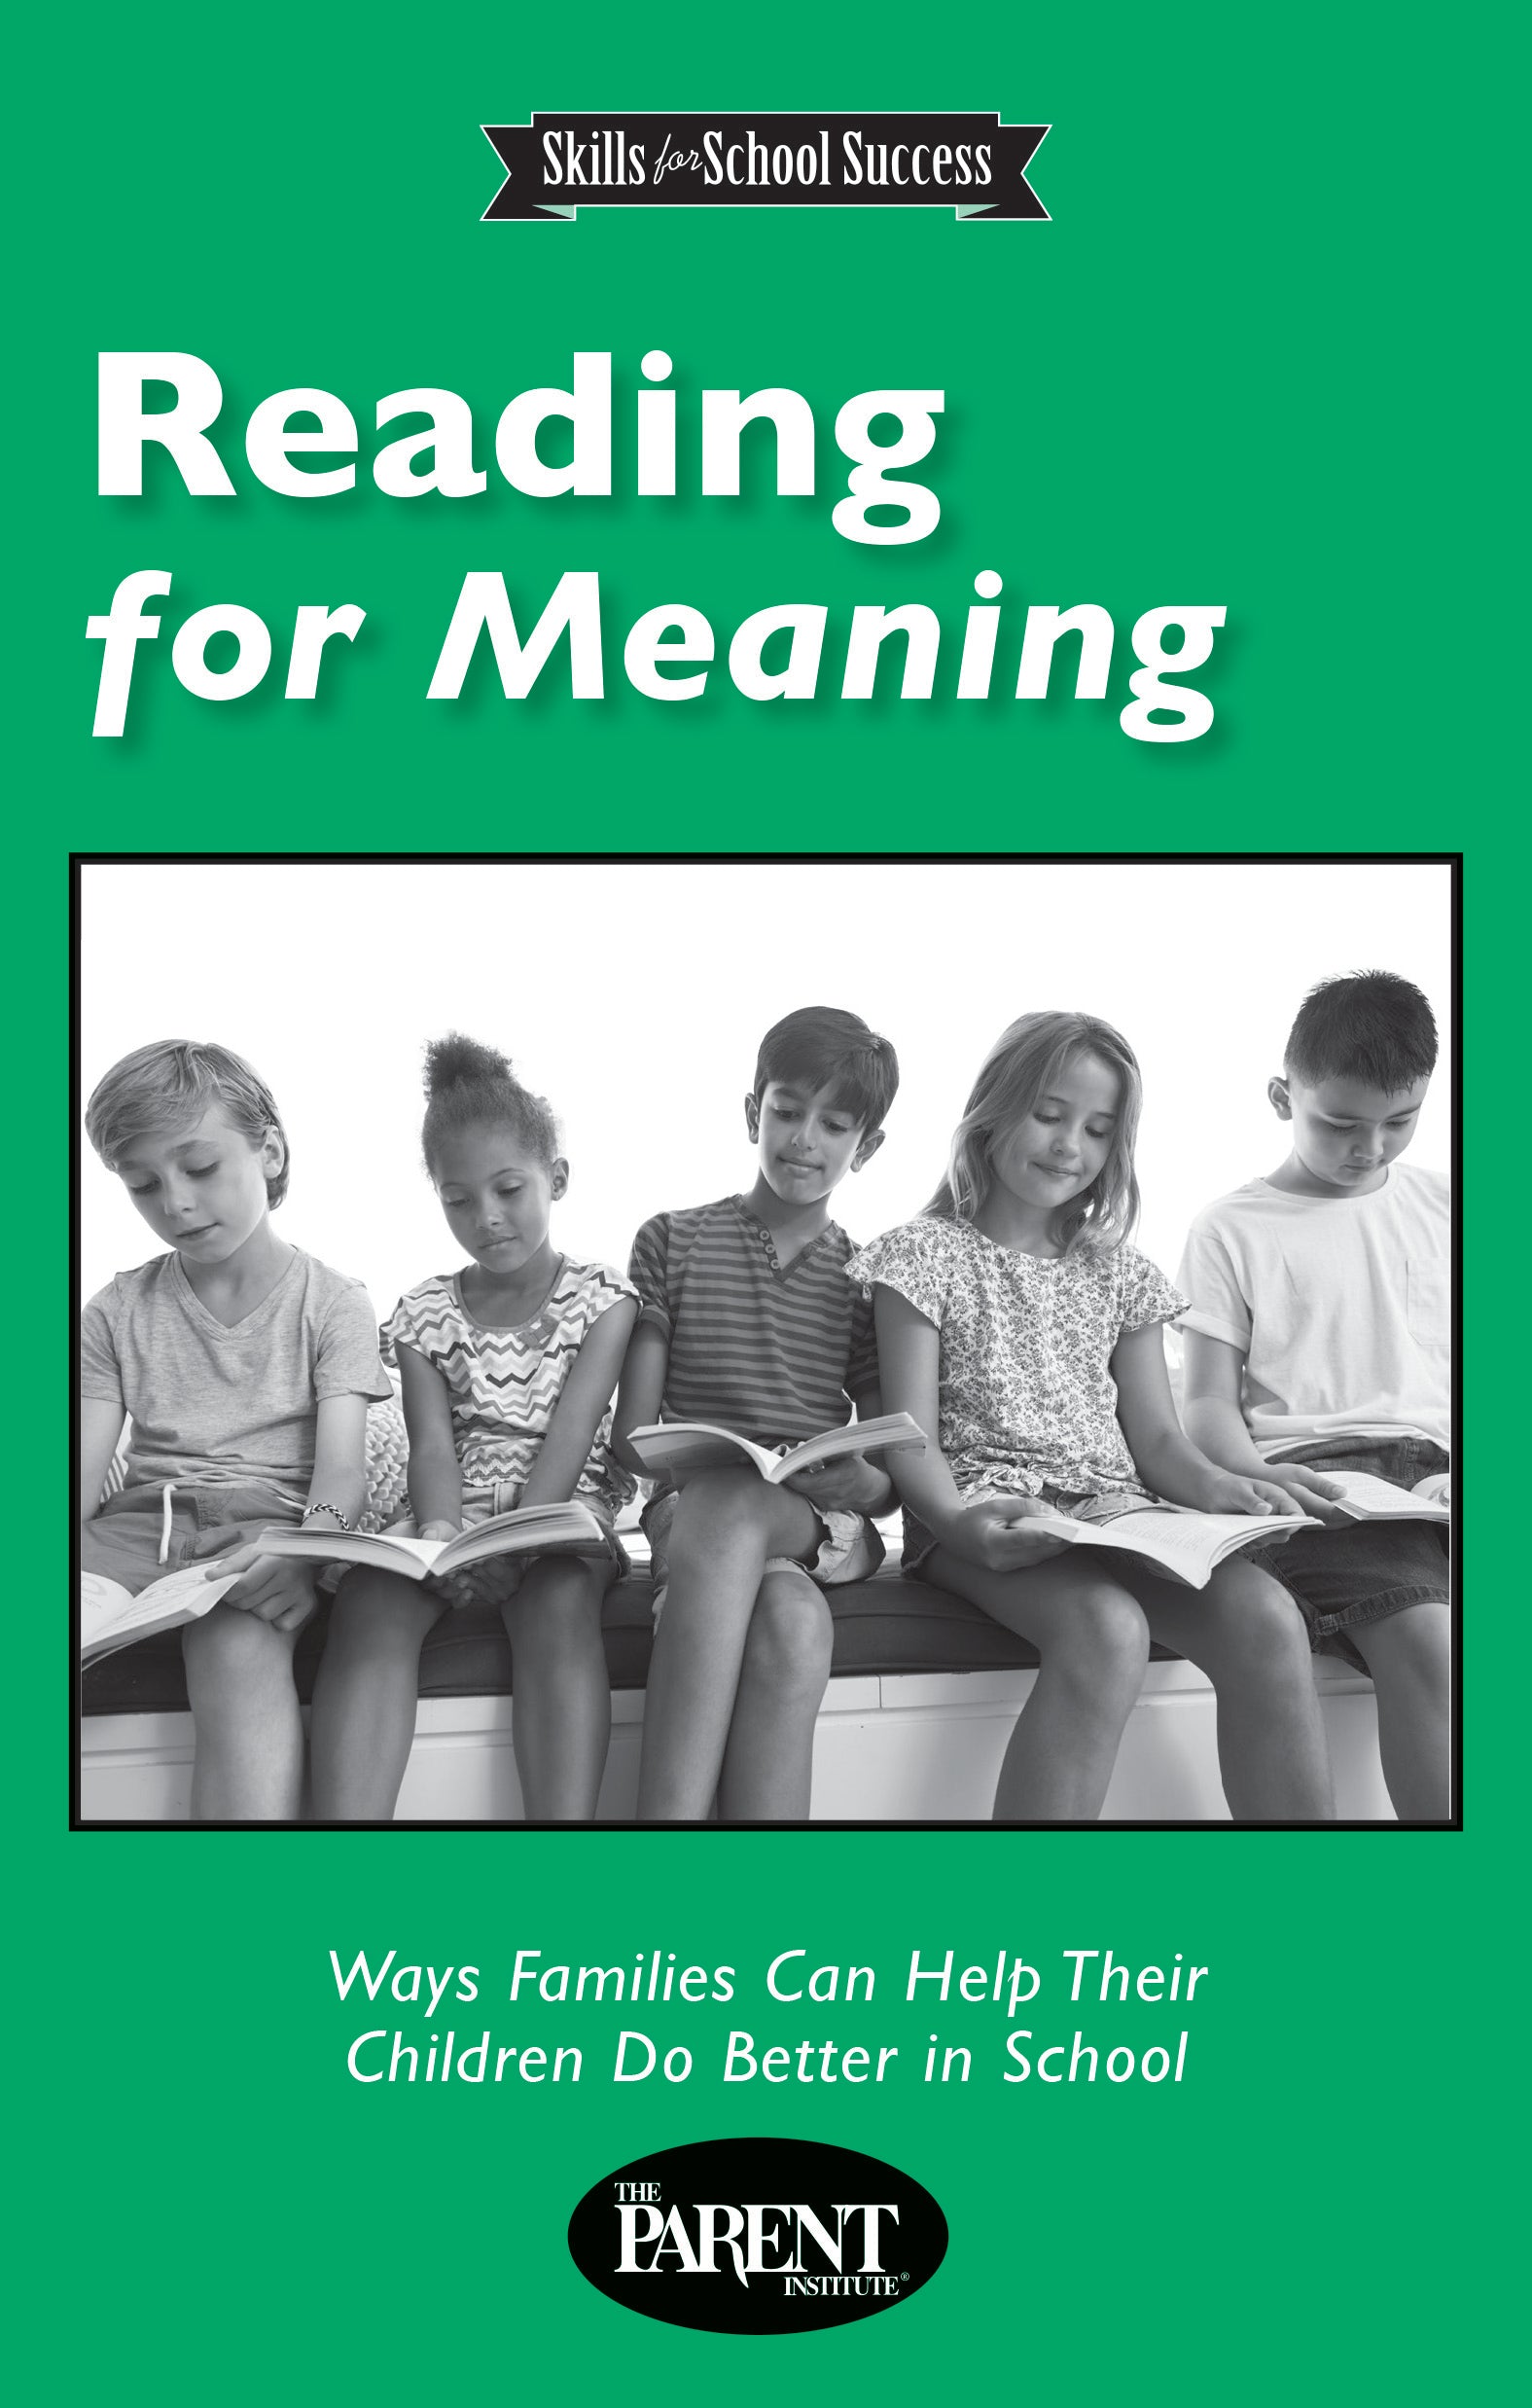 Reading for Meaning Booklet for Parents and Families